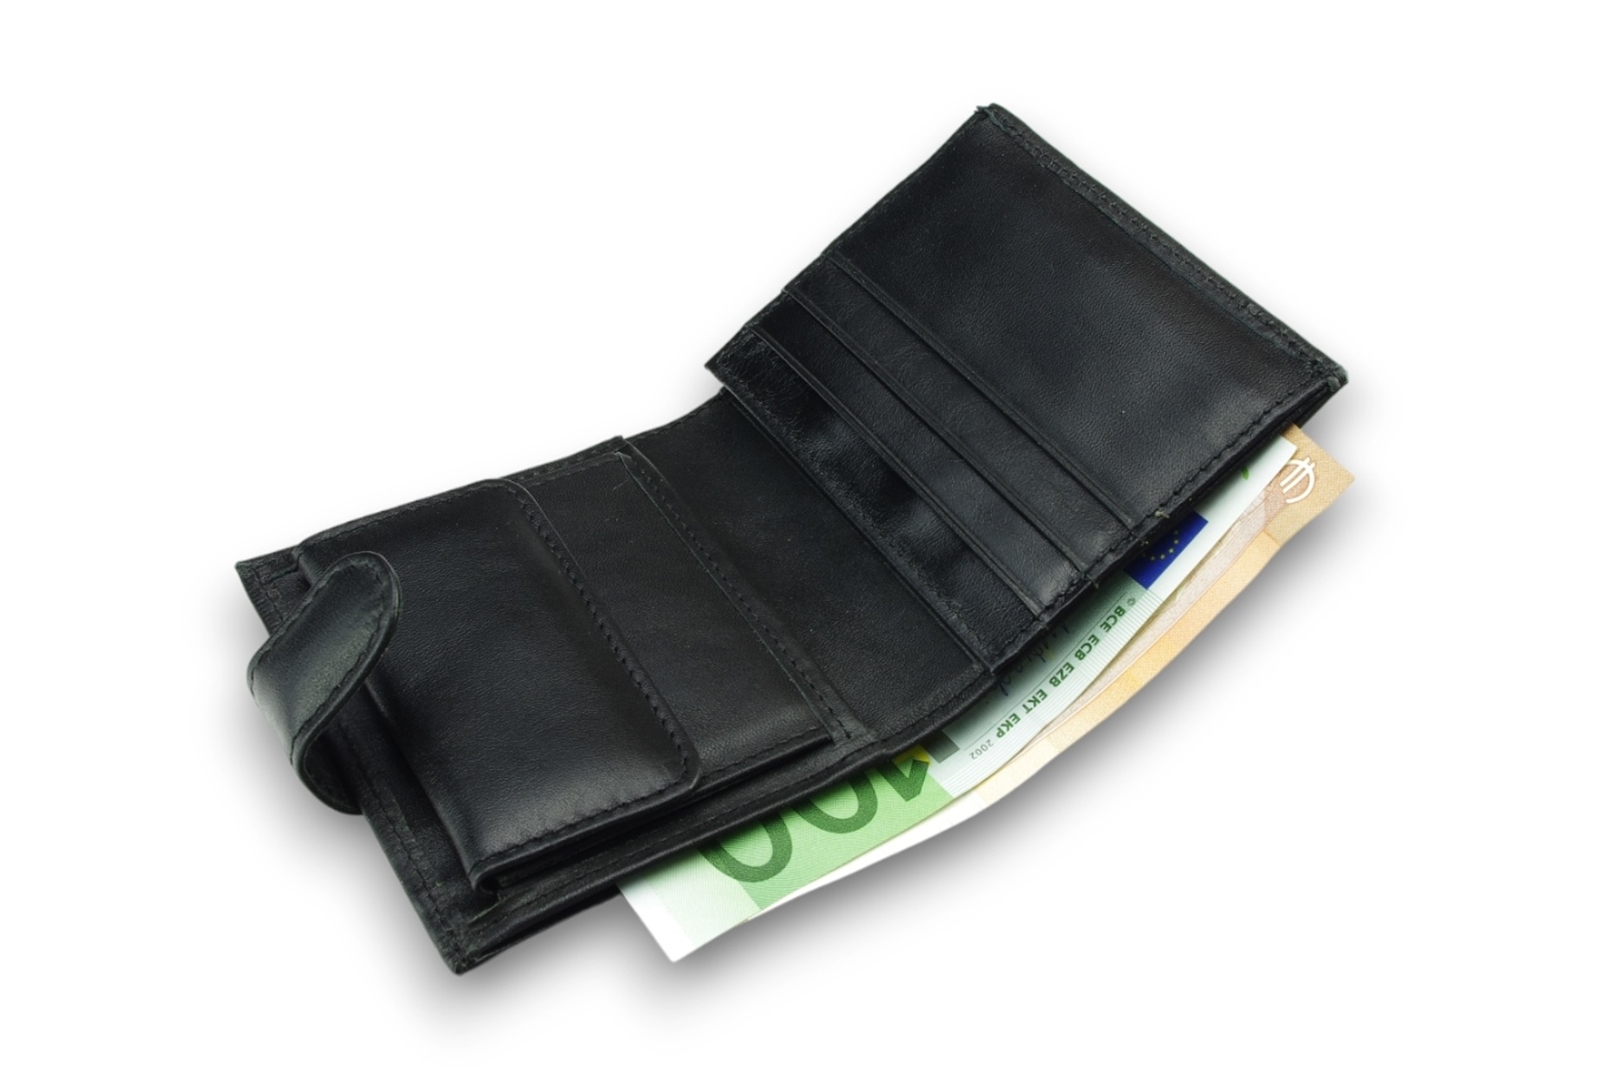 a LEATHER WALLET Model  32R BL-0-1